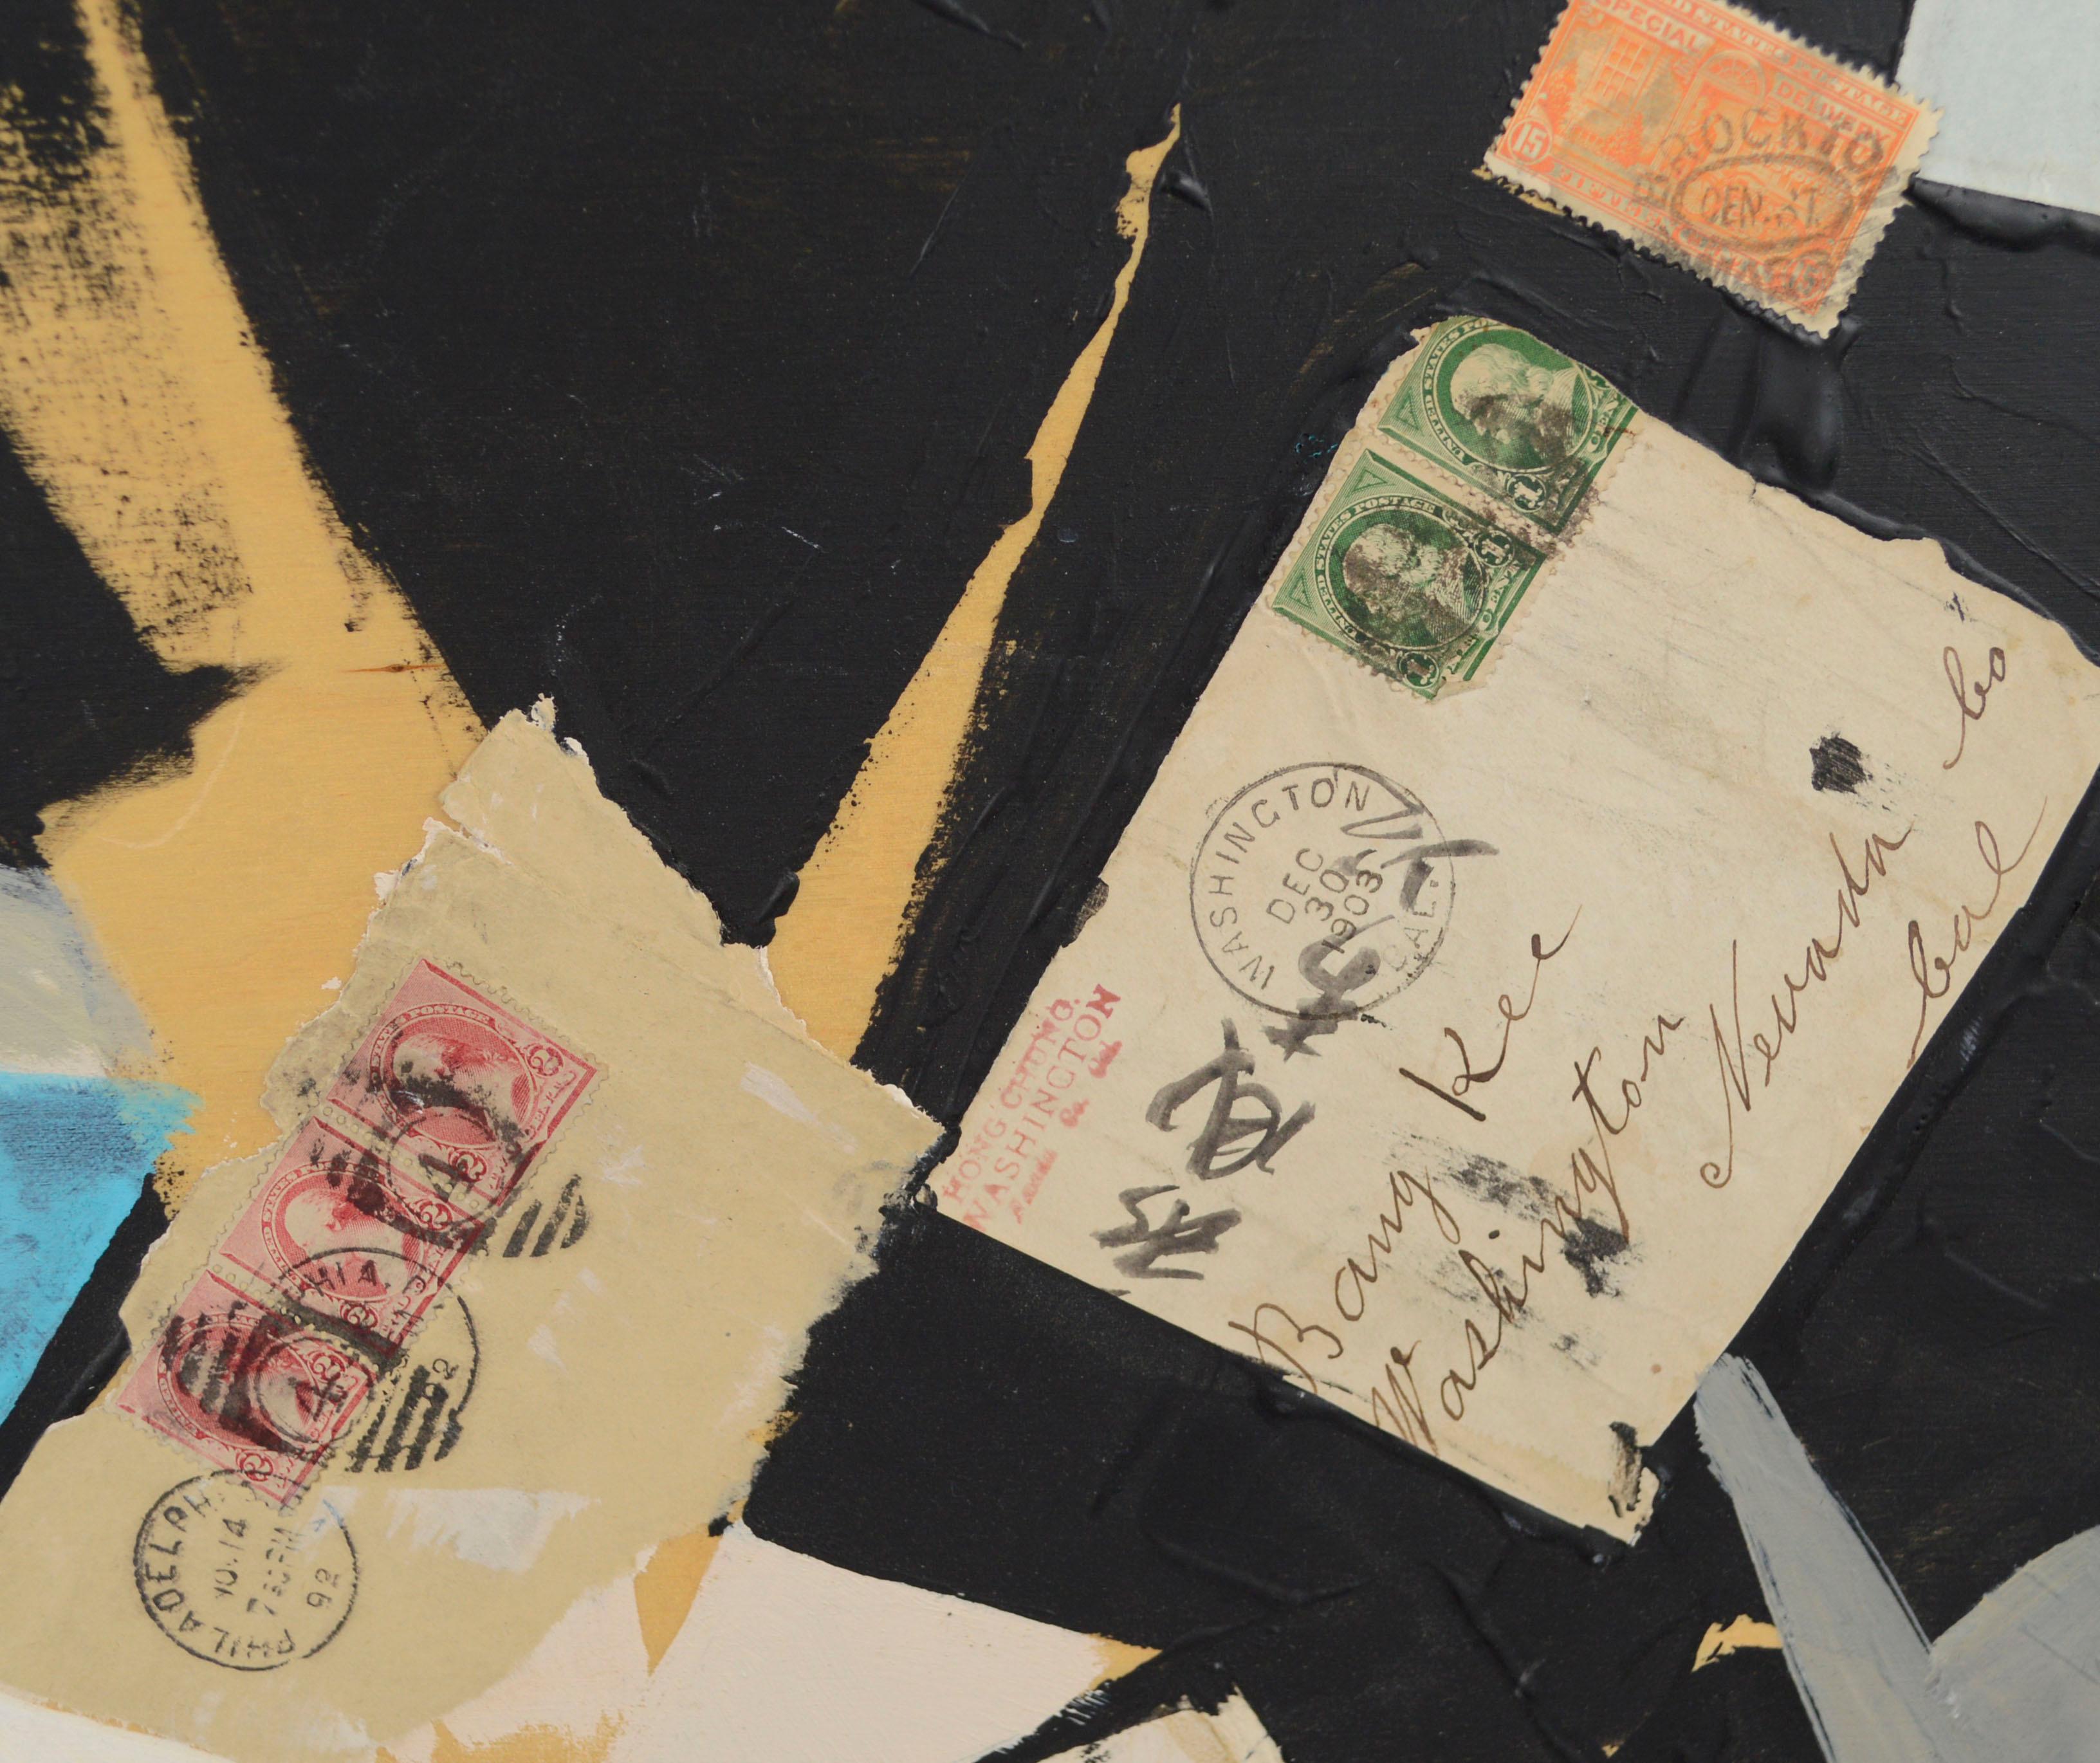 A unique contemporary abstract expressionist painting with collaged found object elements, including a torn page from Robinson Crusoe, vintage stamps, and old letters by Bay Area artist Michael Pauker (American, b.1957). Titled 